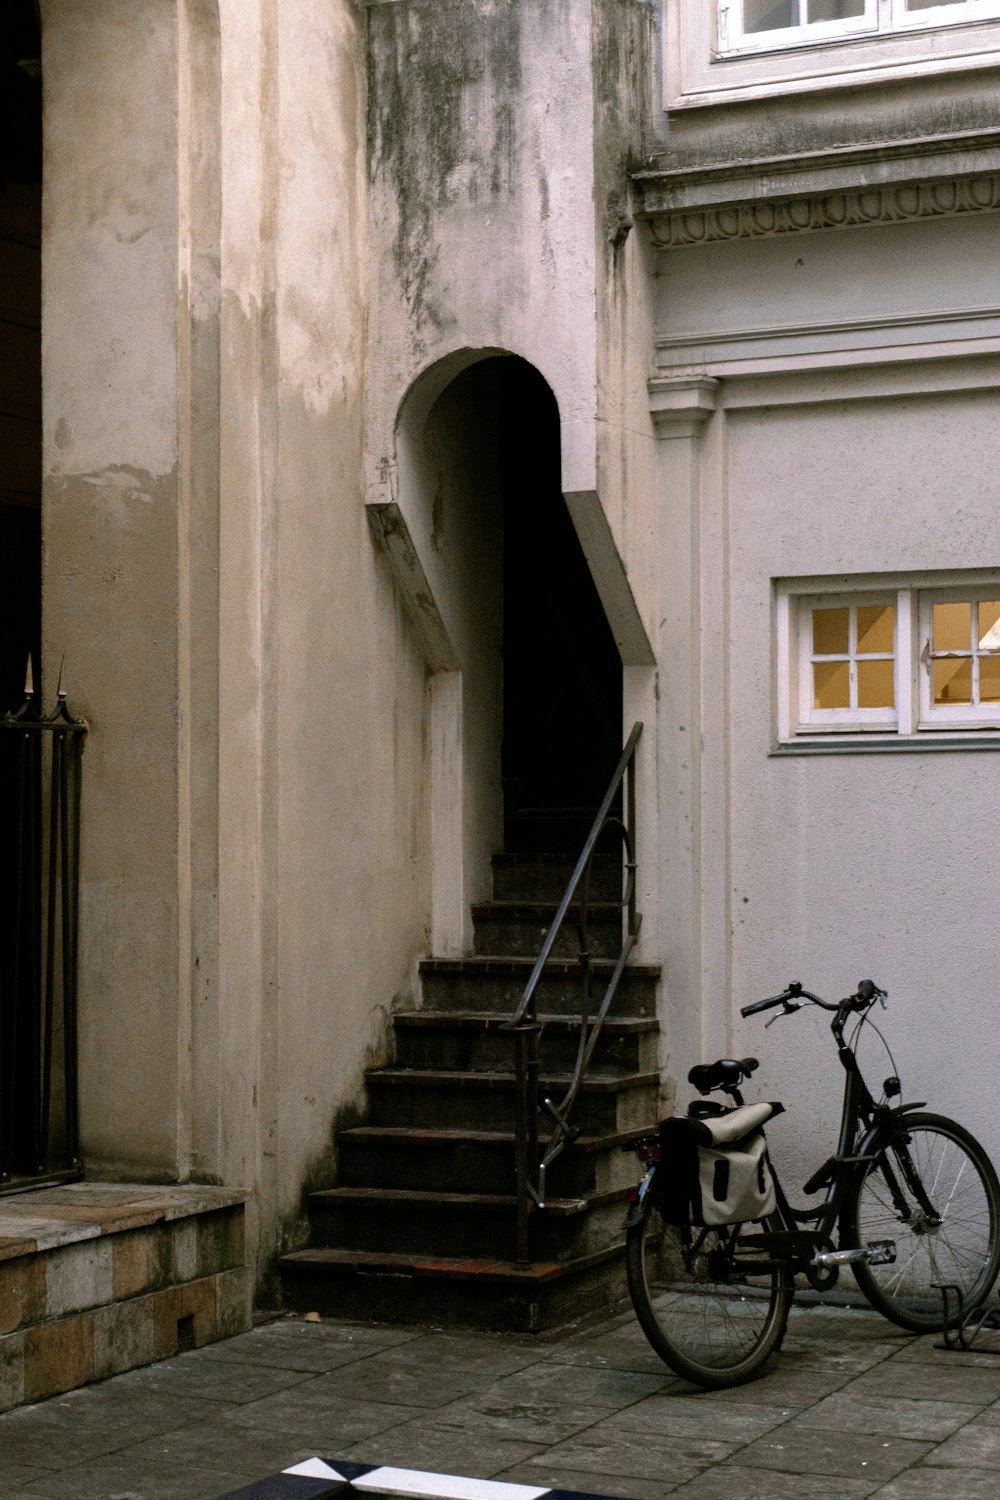 a bicycle is parked next to a building